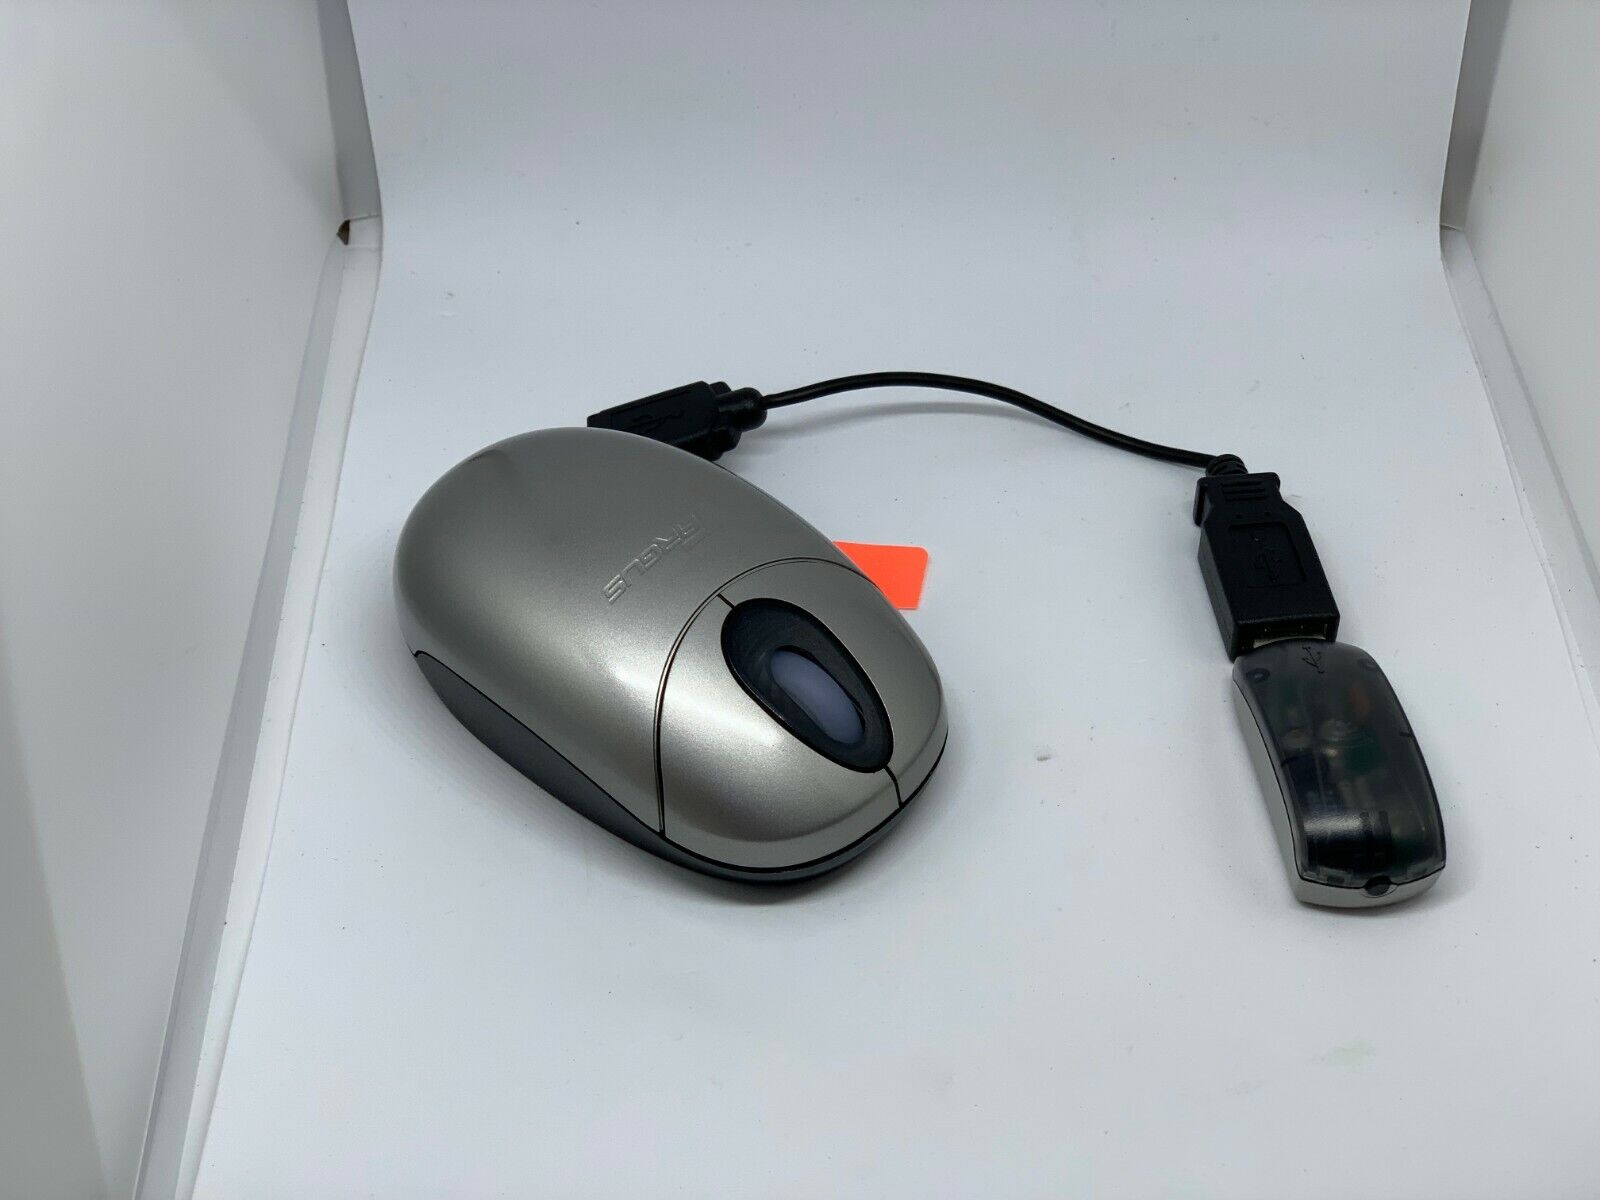 Targus Wirelss Optical Wheel Mouse With USB Dongle Model PAUM005V2.